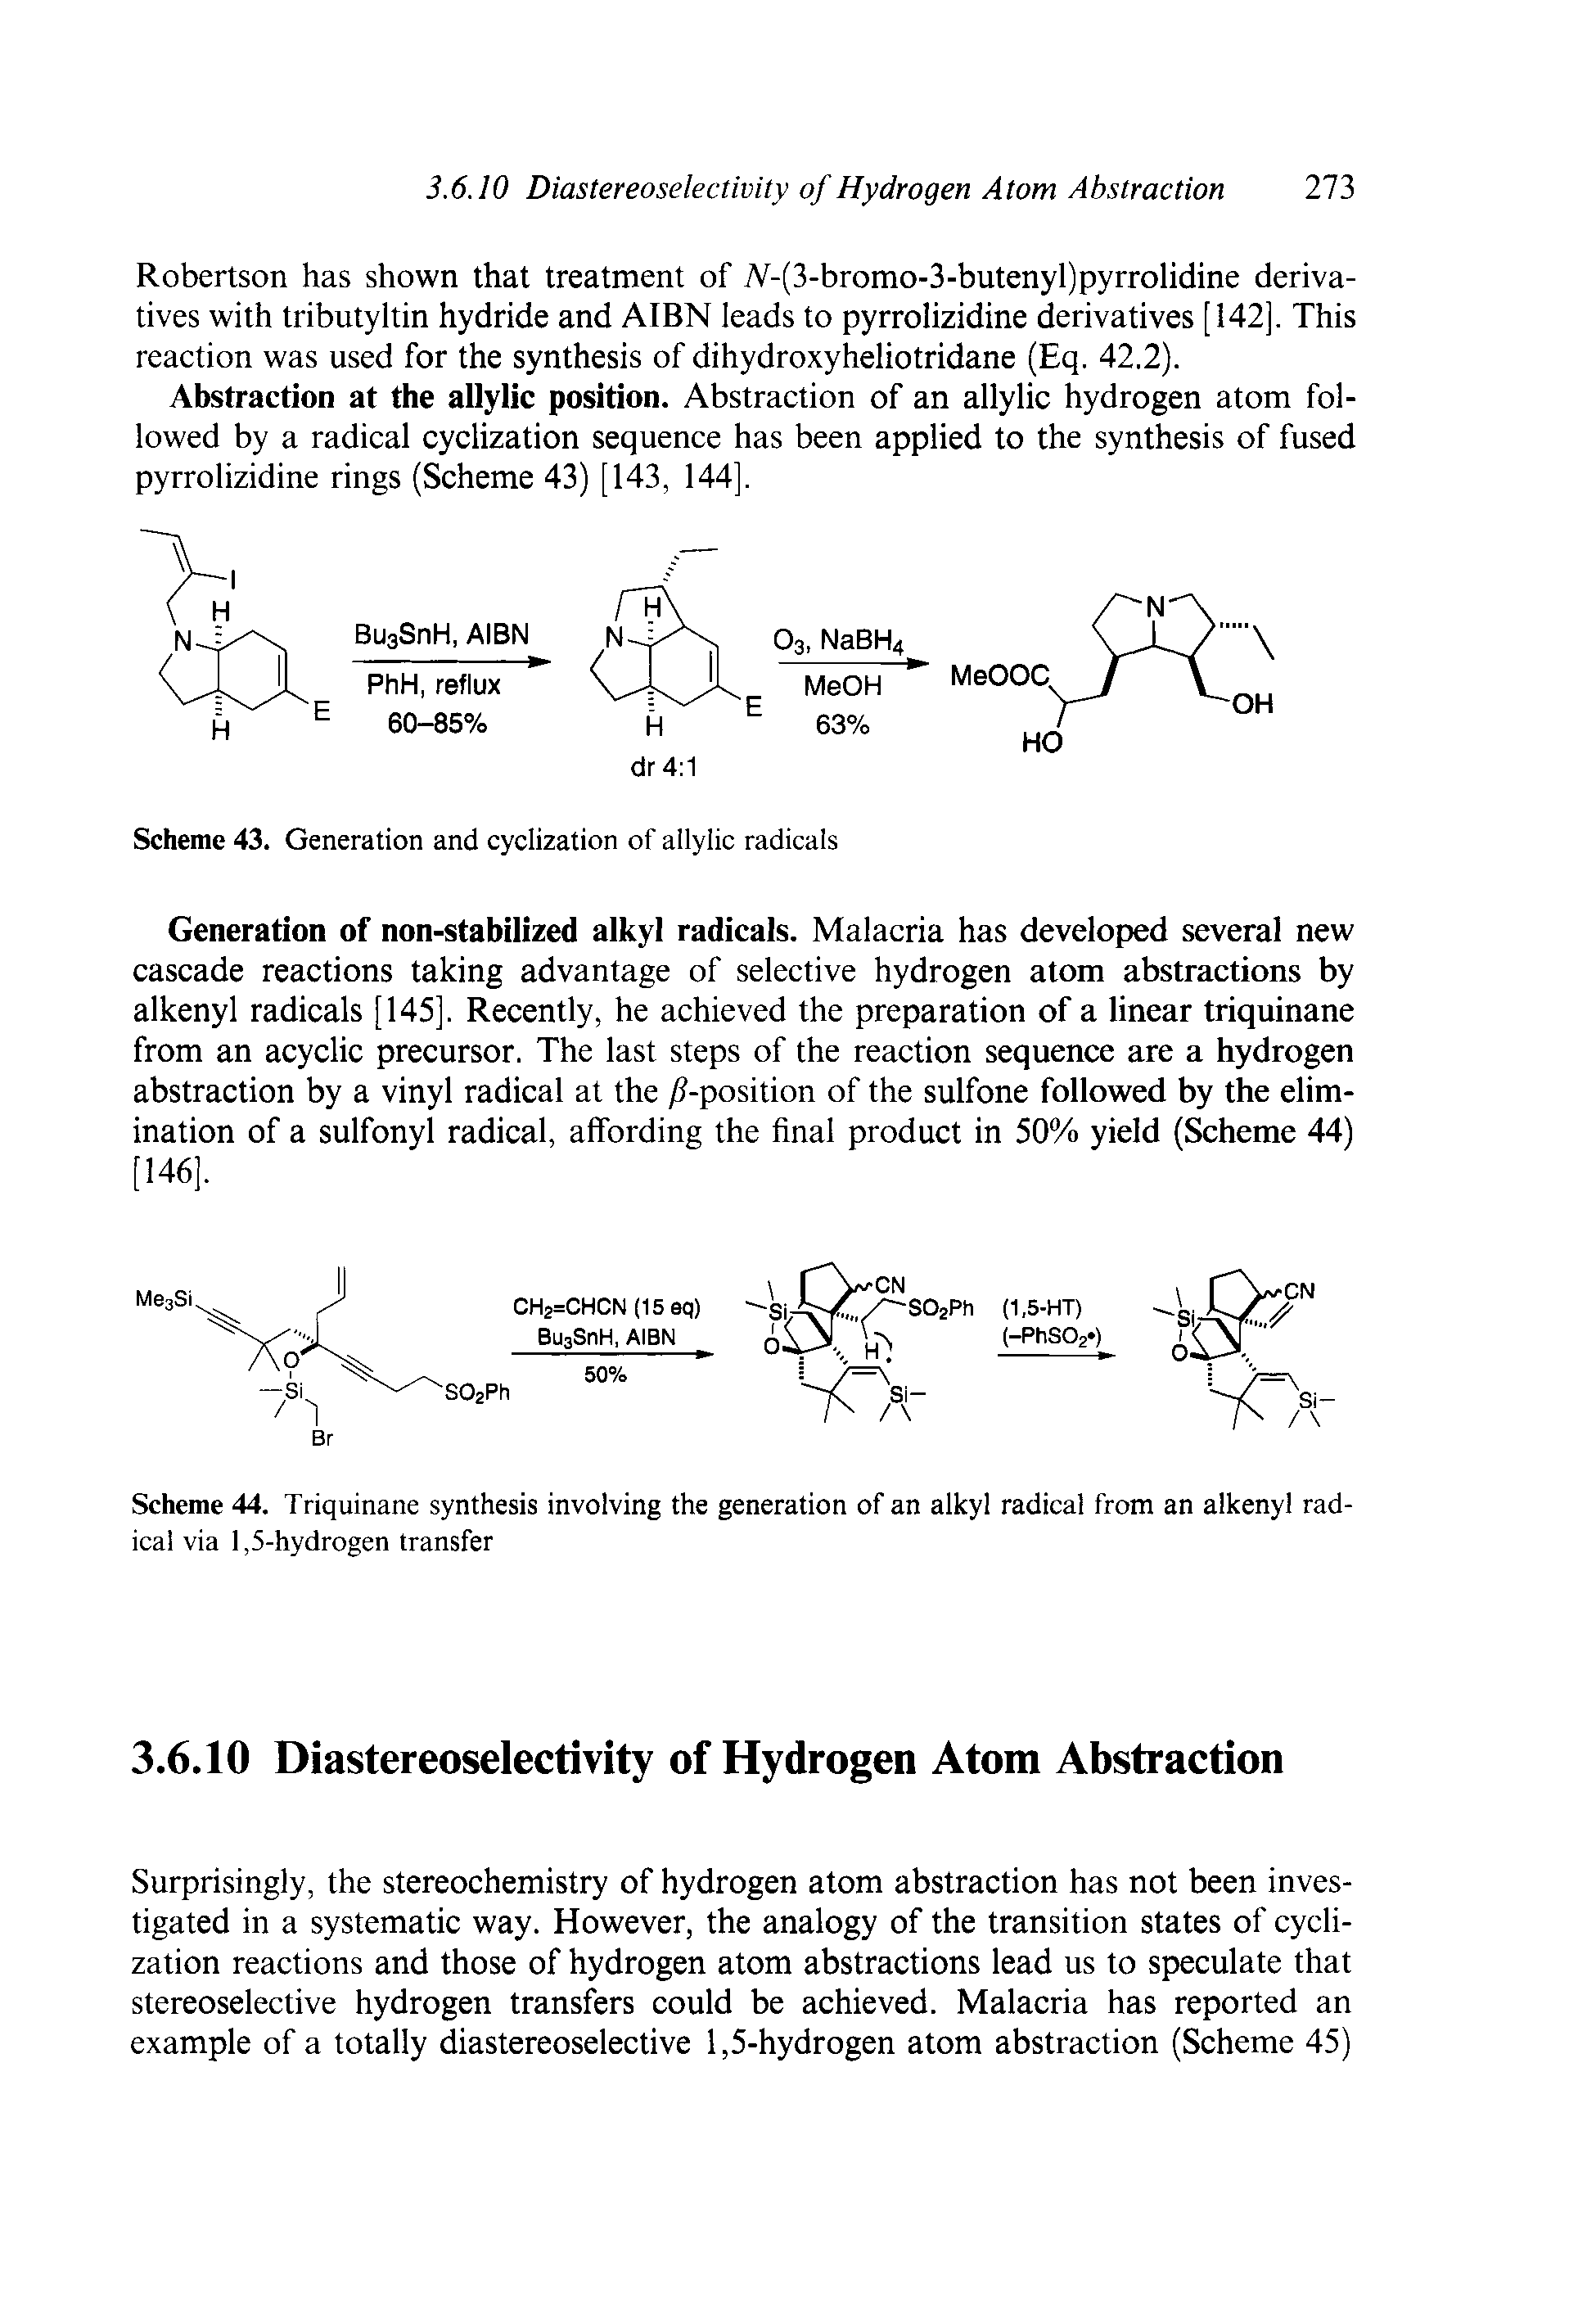 Scheme 44. Triquinane synthesis involving the generation of an alkyl radical from an alkenyl radical via 1,5-hydrogen transfer...